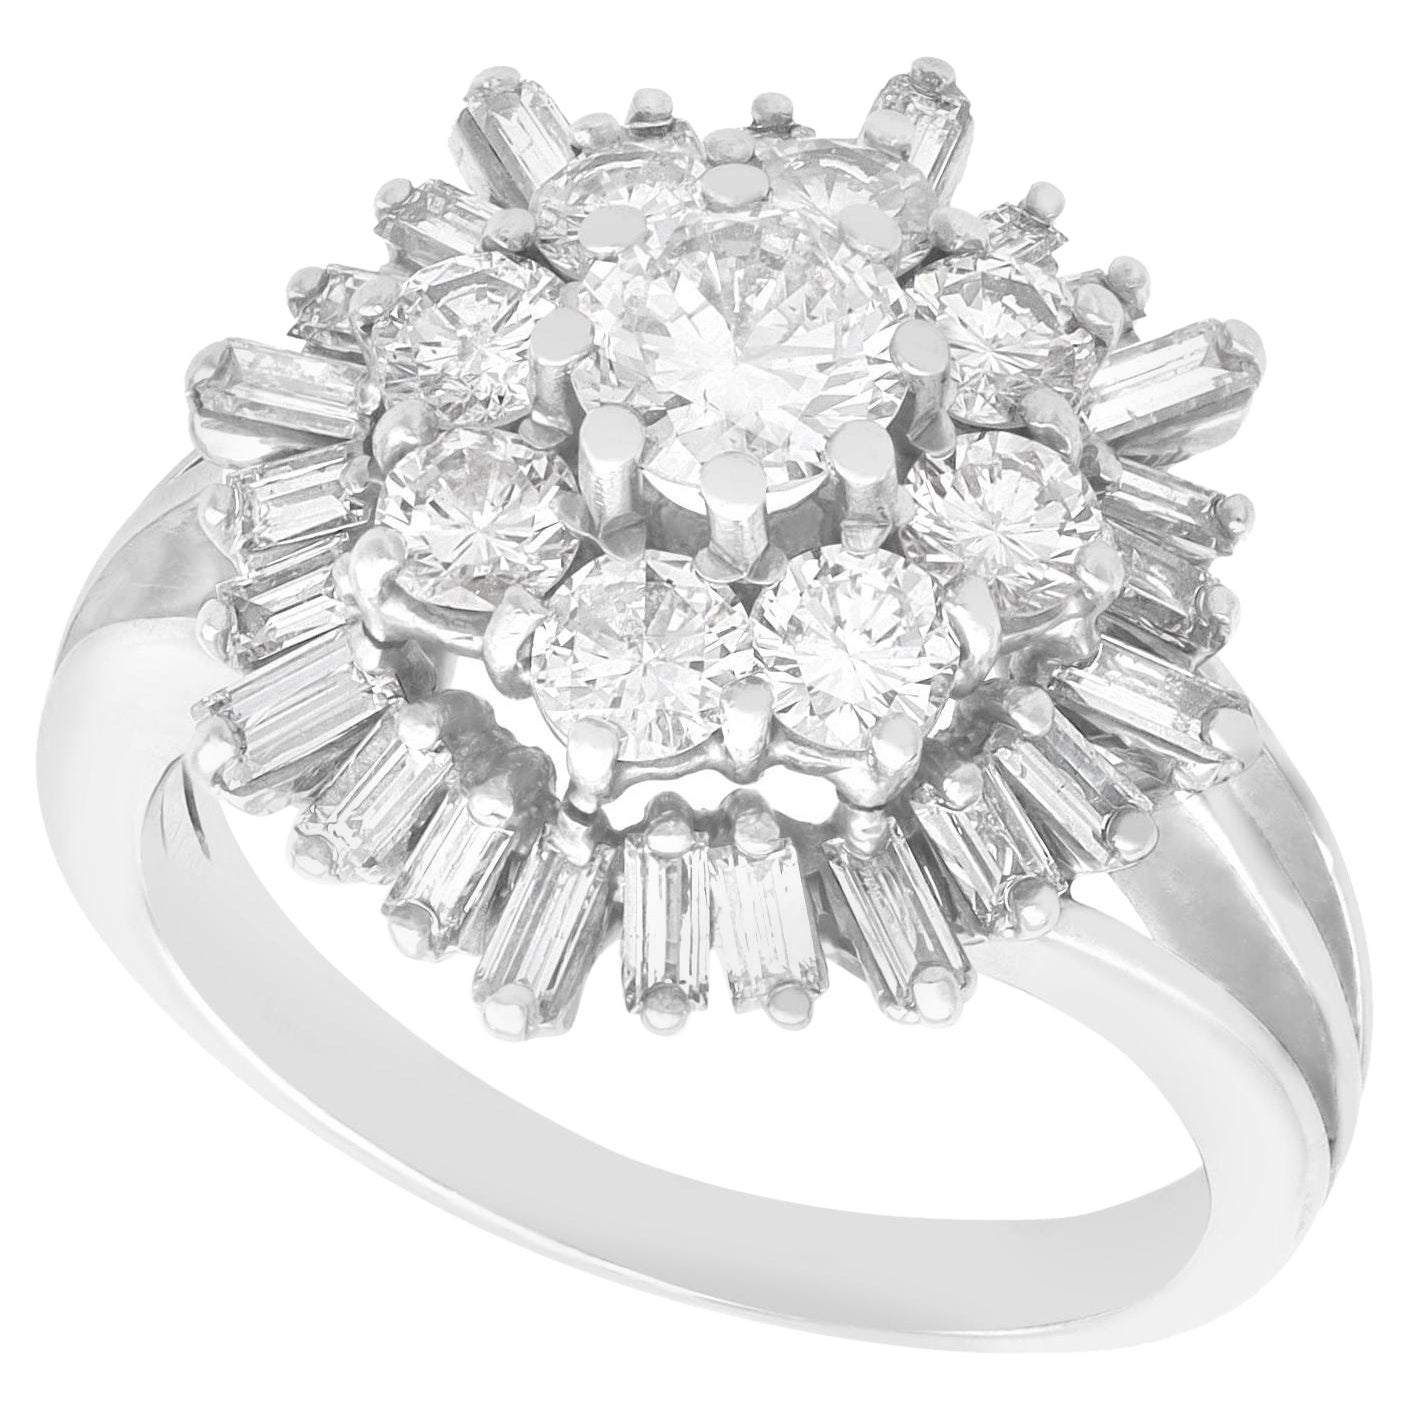 Vintage 3.56 Carat Diamond and White Gold Cluster Ring, circa 1960 For Sale